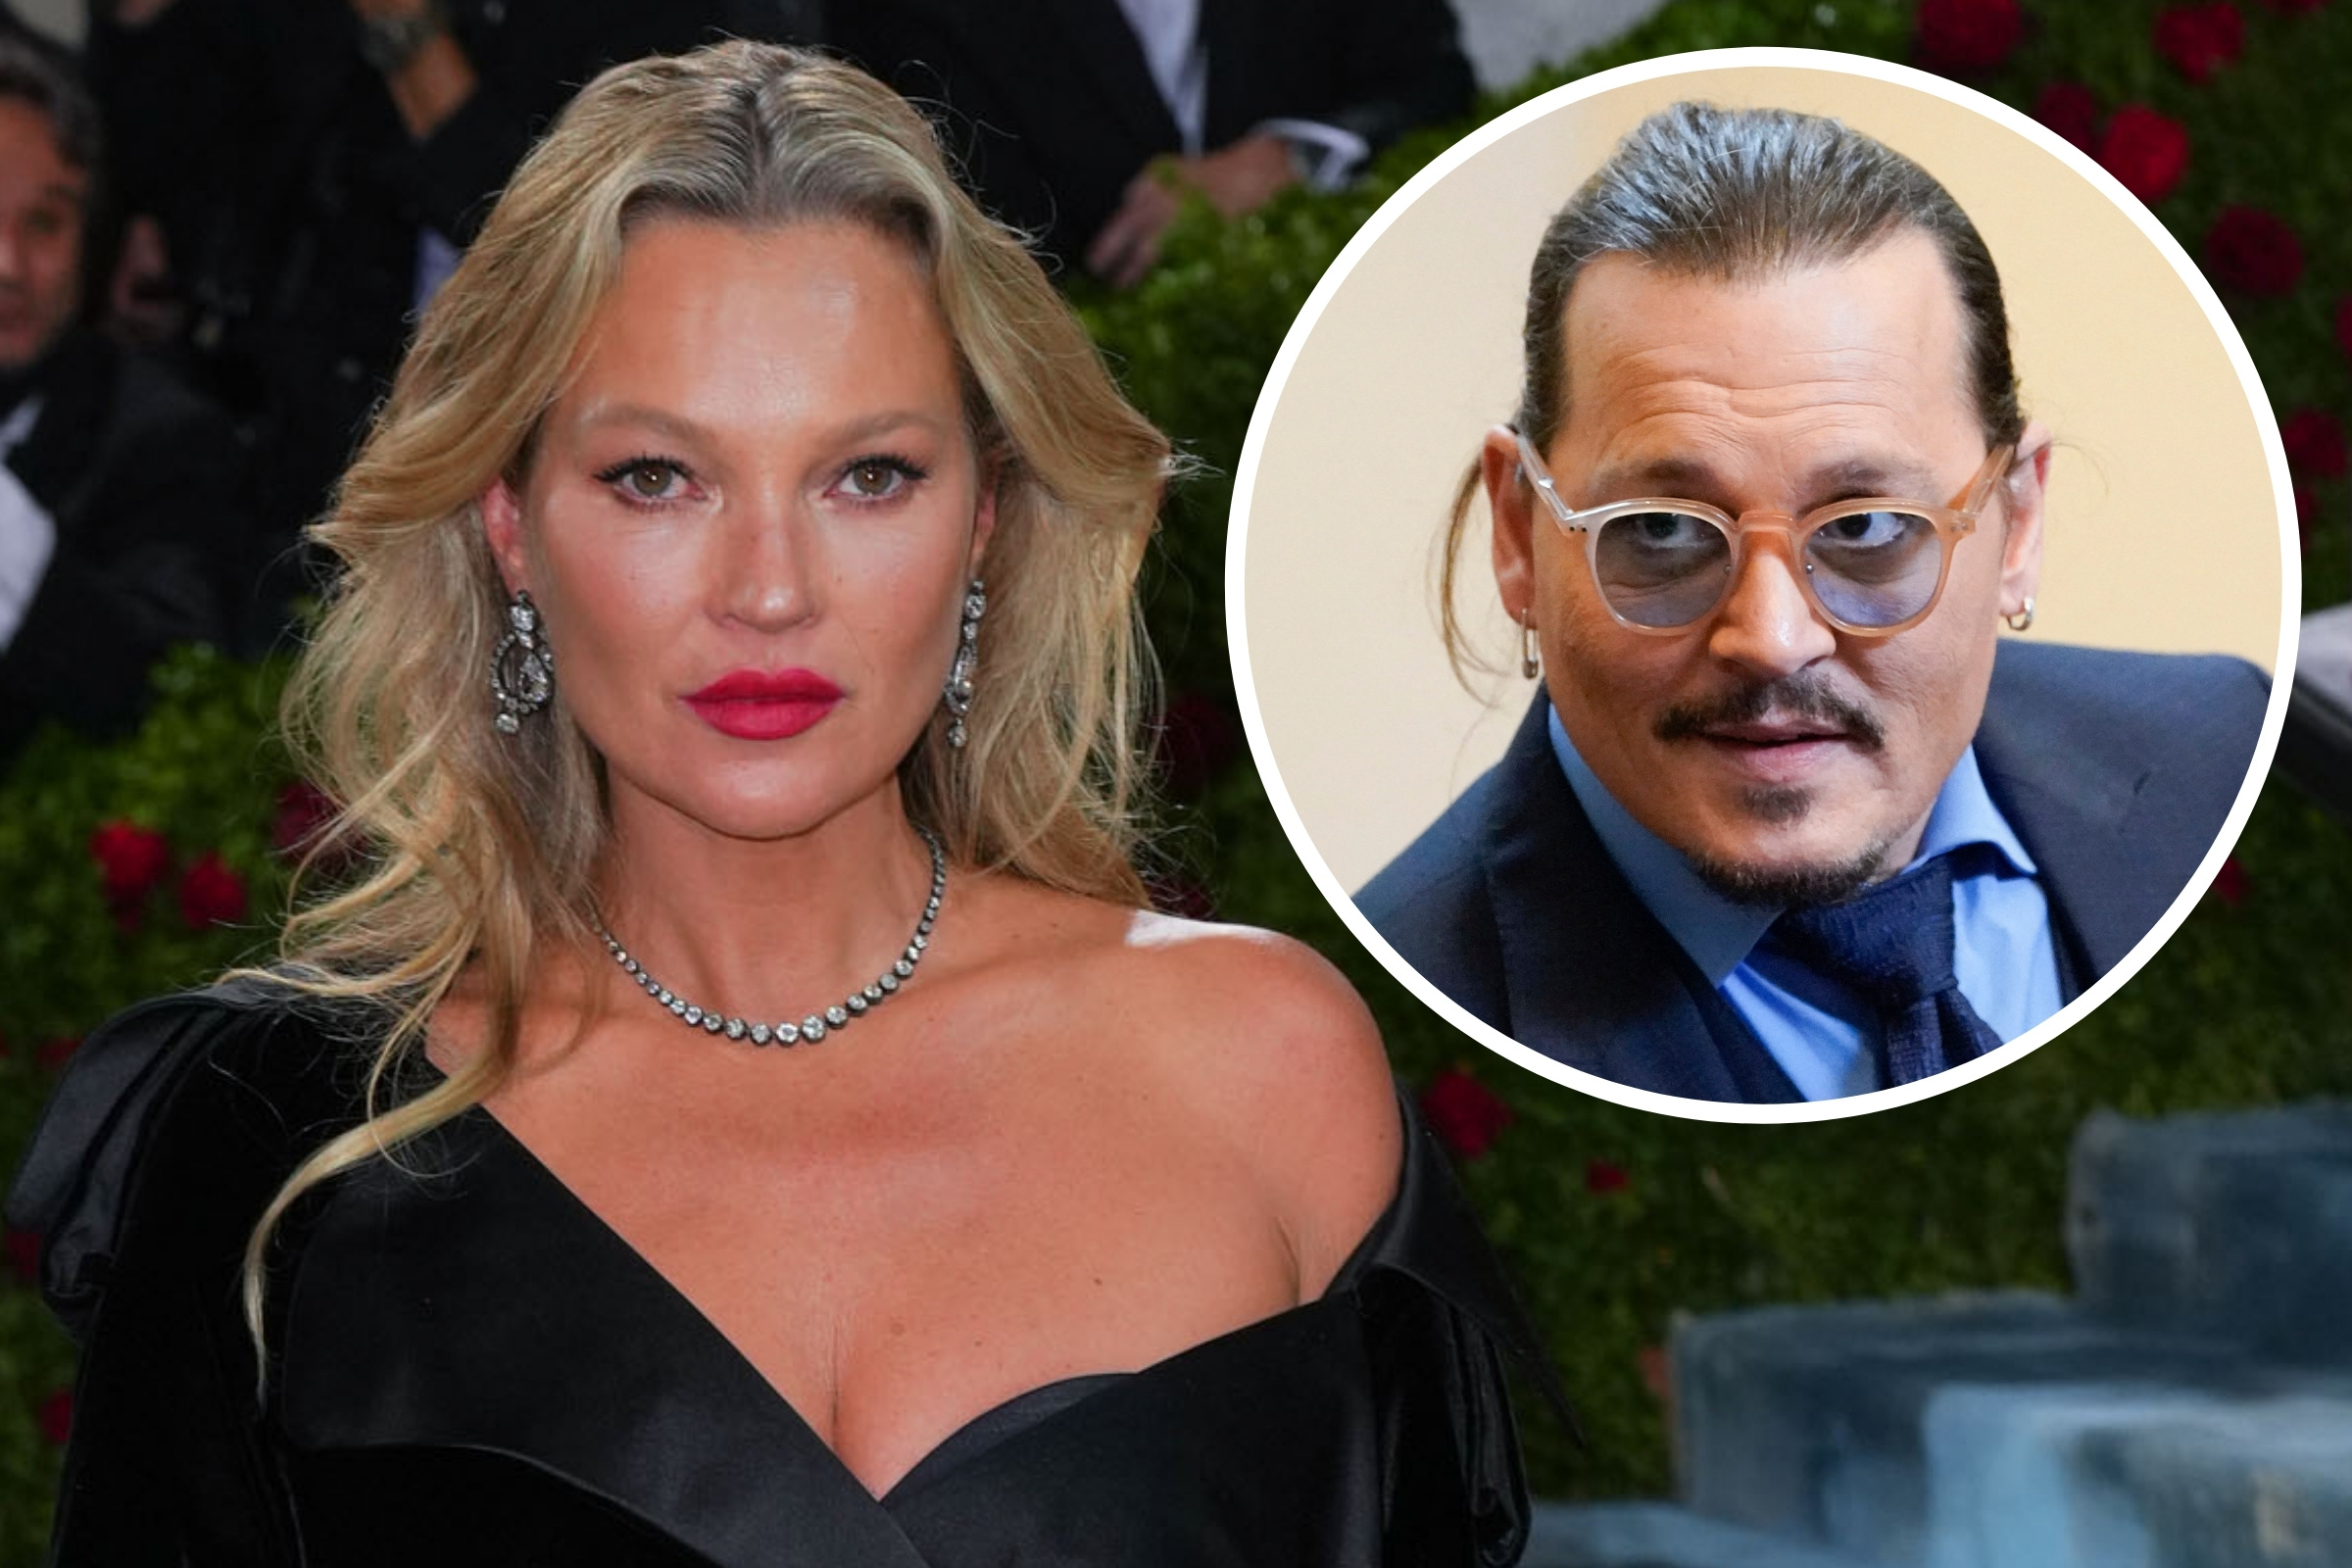 Kate Moss Wore Diamonds Johnny Depp Her the 'Crack His A**'